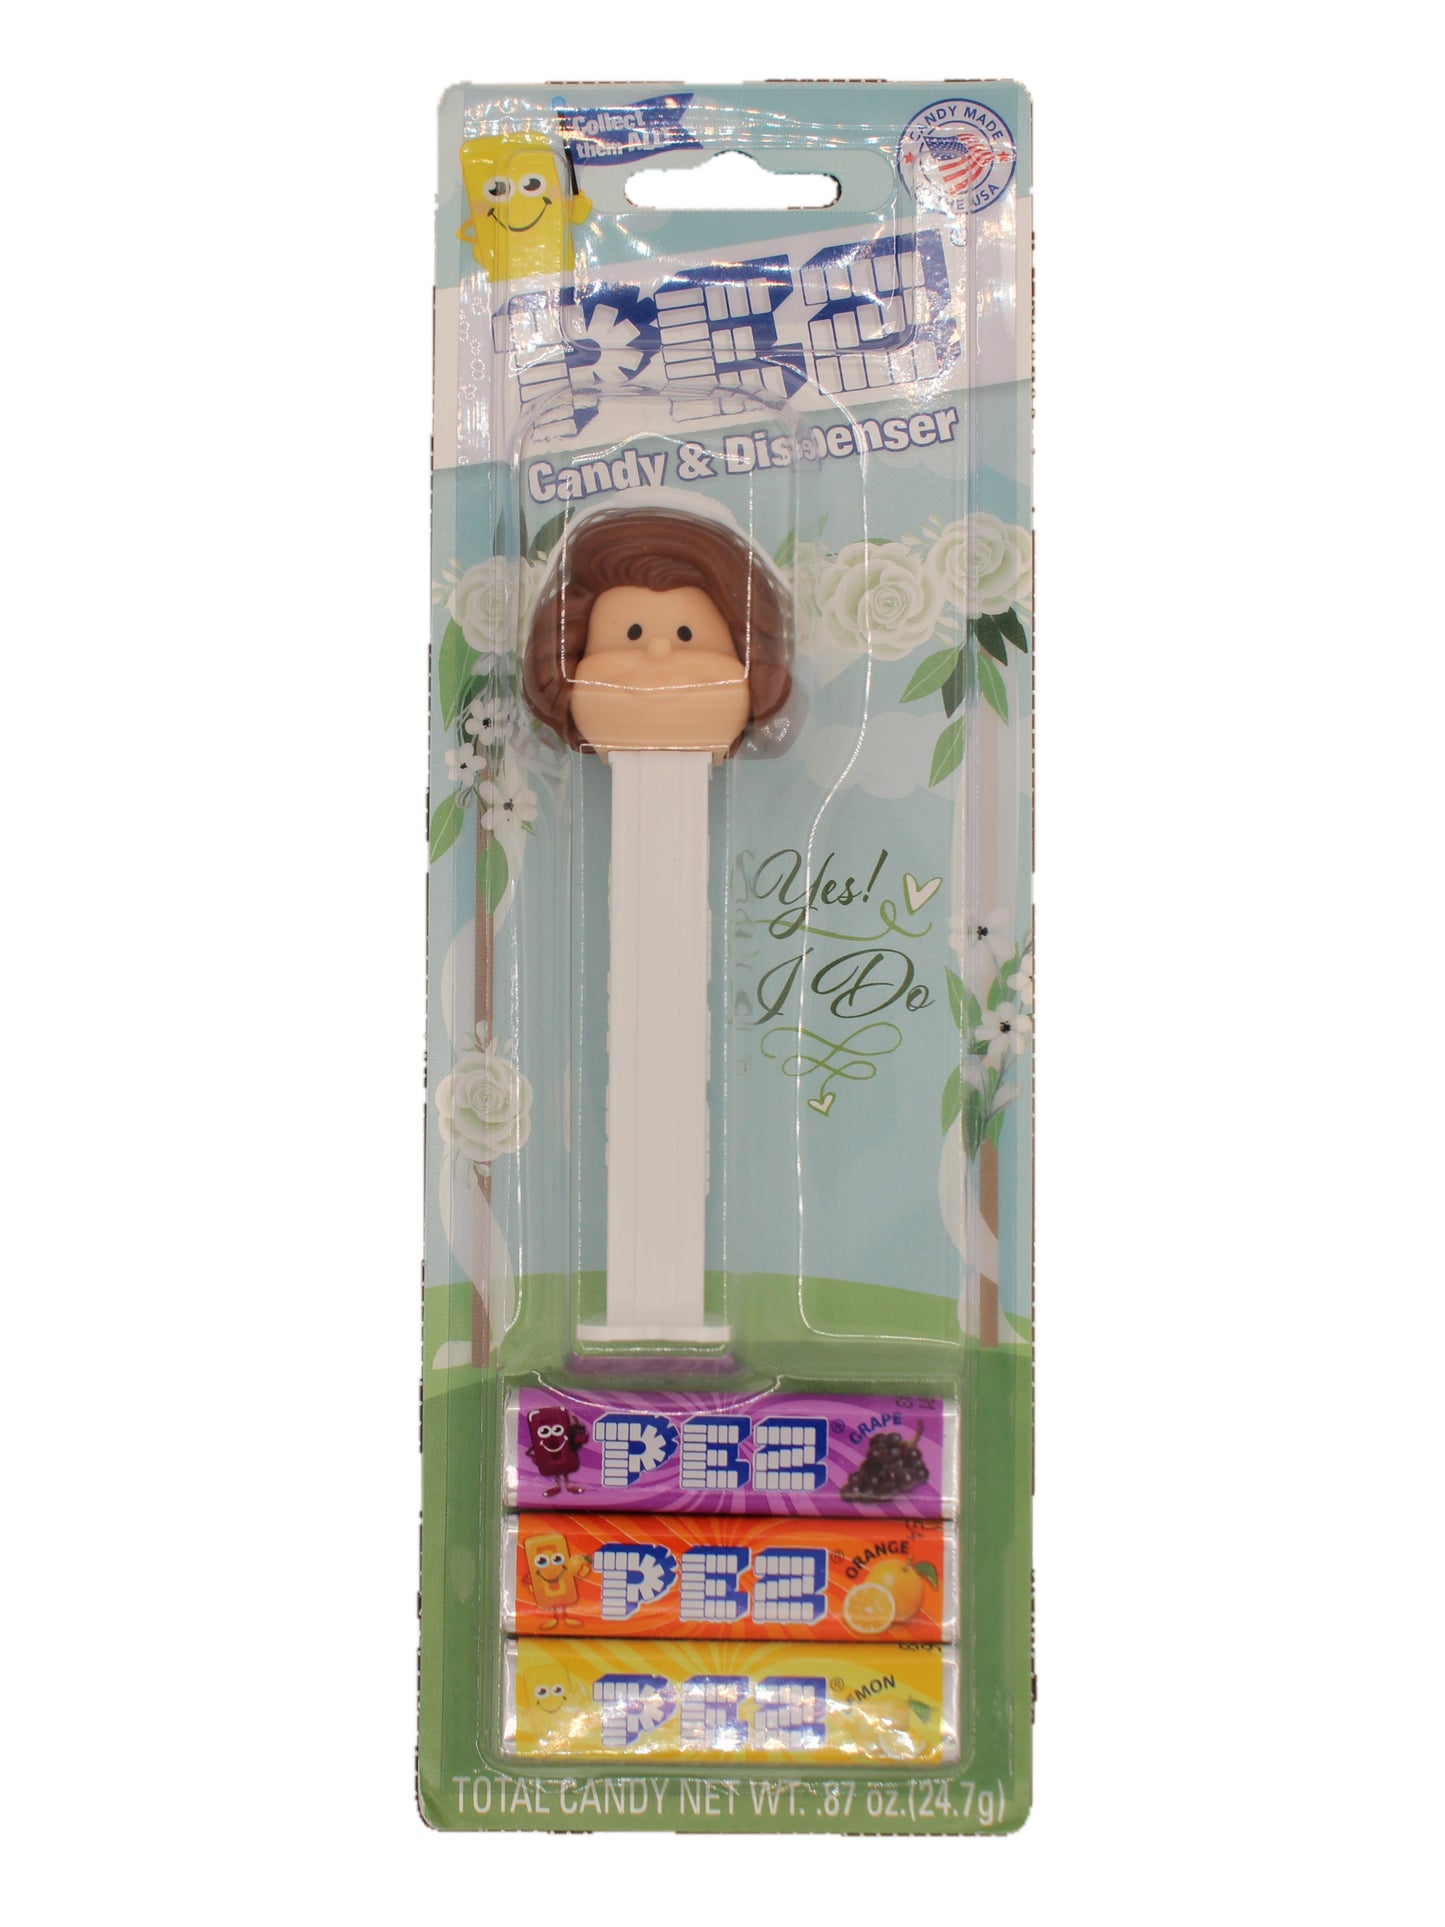 Bride Pez, Brunette with Light Skin Tone, Mint on Card or Loose!